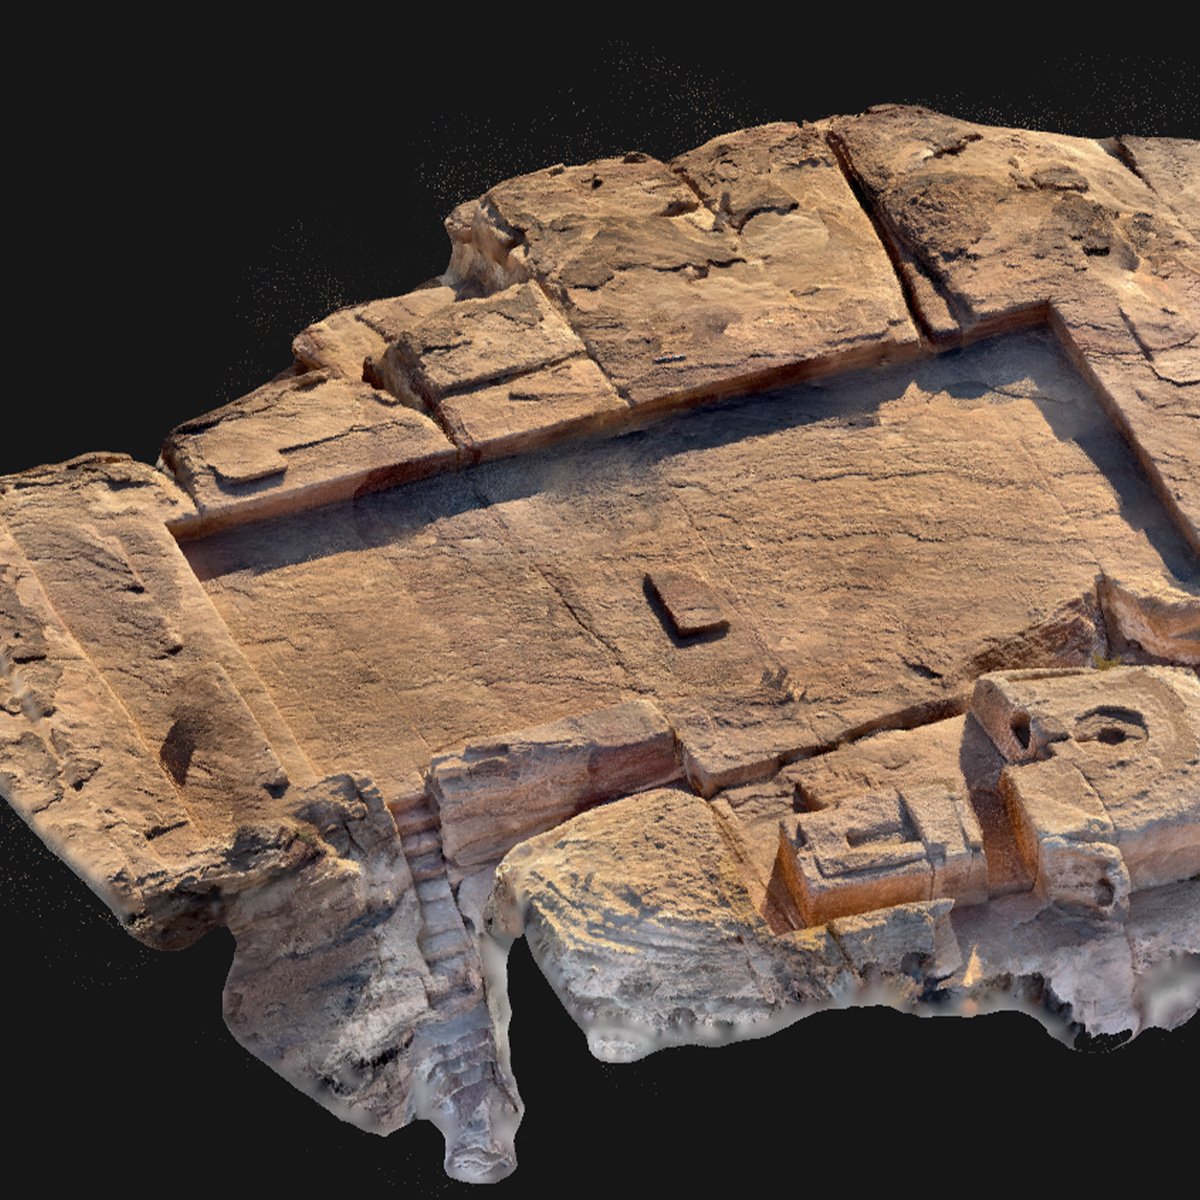 #Pix4D collaborated with the @ifporient, @VUBrussel, and @unil to help digitize an archaeological mission in #Petra! With #PIX4Dcatch the archaeologists could #3Dscan the site with their phones, resulting in precise data capture & analysis: hubs.li/Q02r2Vkq0